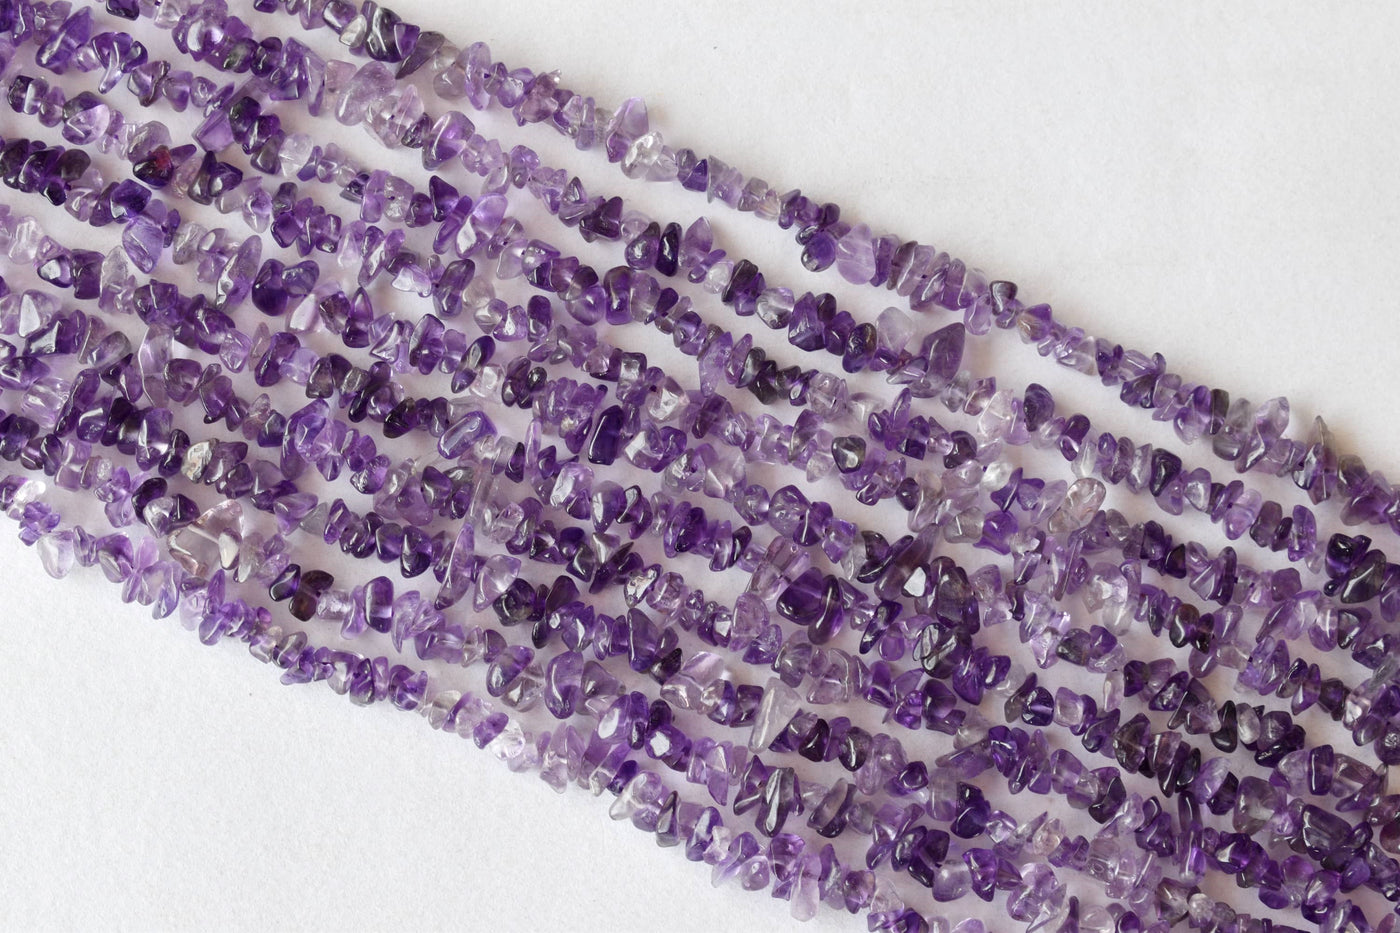 Uncut Raw Amethyst Crystal Chip Beads for Necklace (Insight and Inspiration)